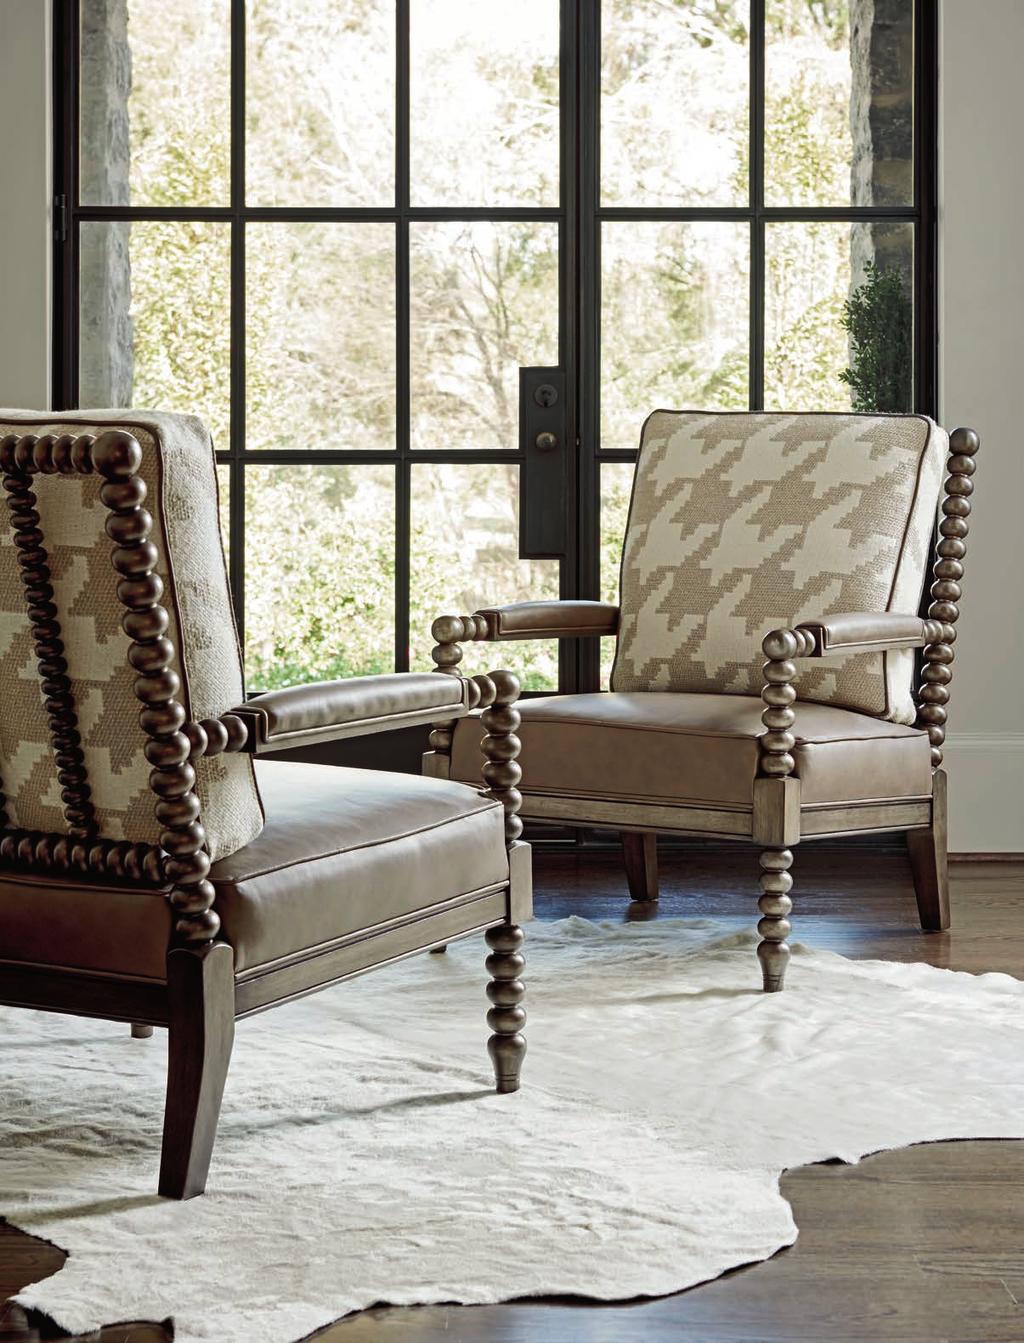 The Griffen chair is the most unique upholstery design in the collection.